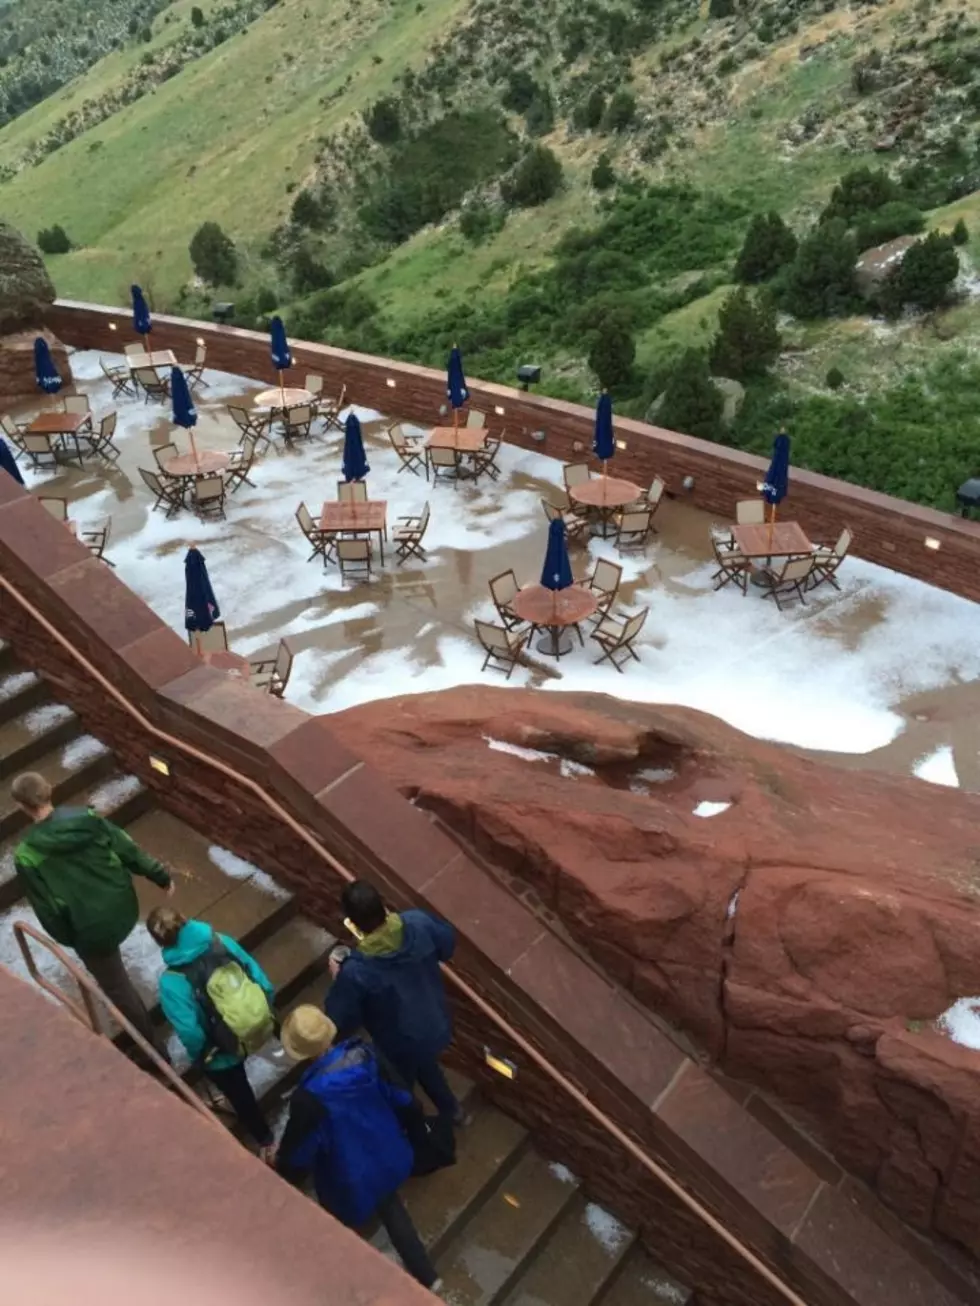 A Friend of Mine Experienced the Hail Storm that Interrupted the Steely Dan Concert at the Red Rocks